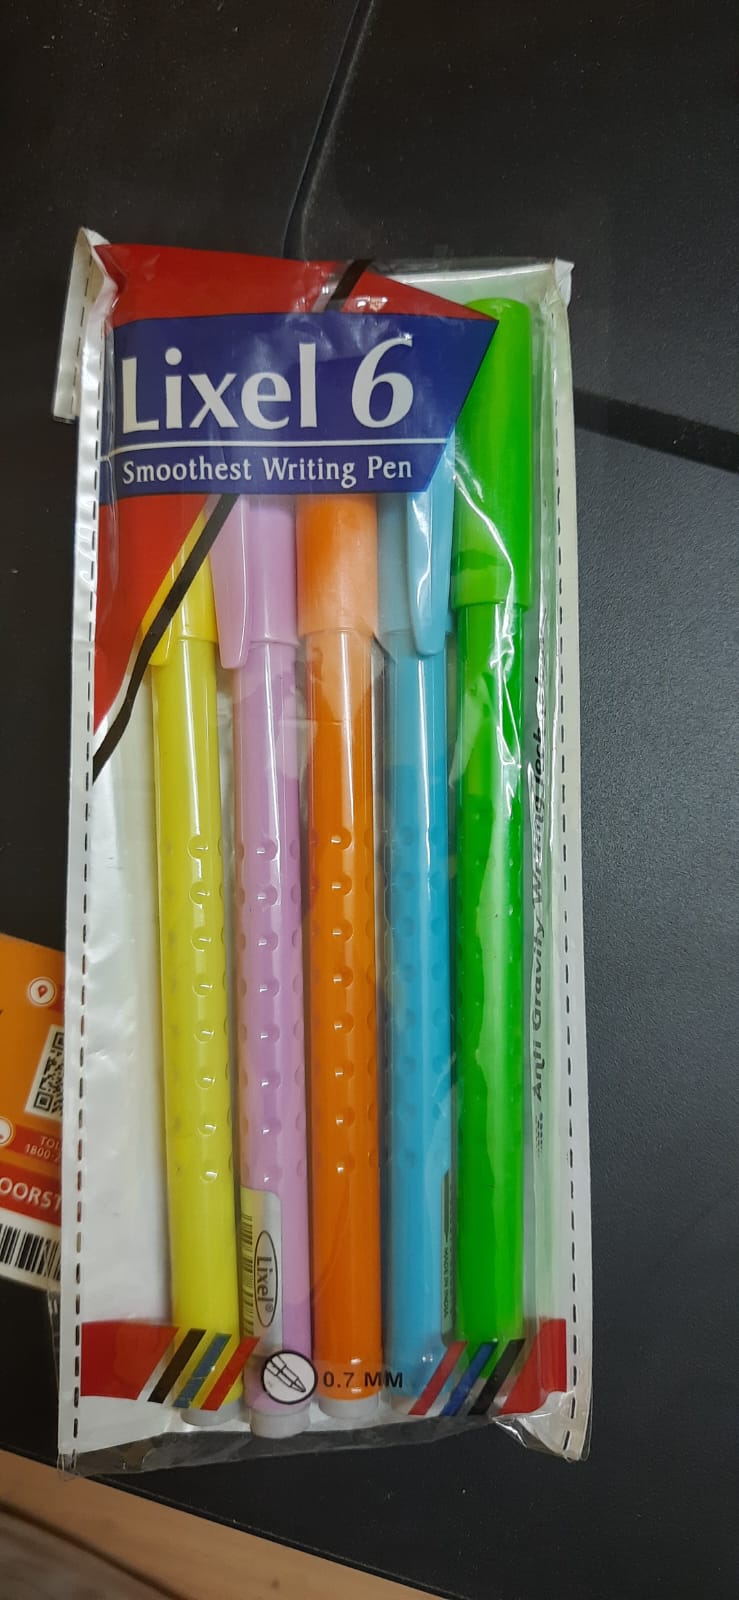 Pen - Smoothest Writing - Pack of 5 Nos